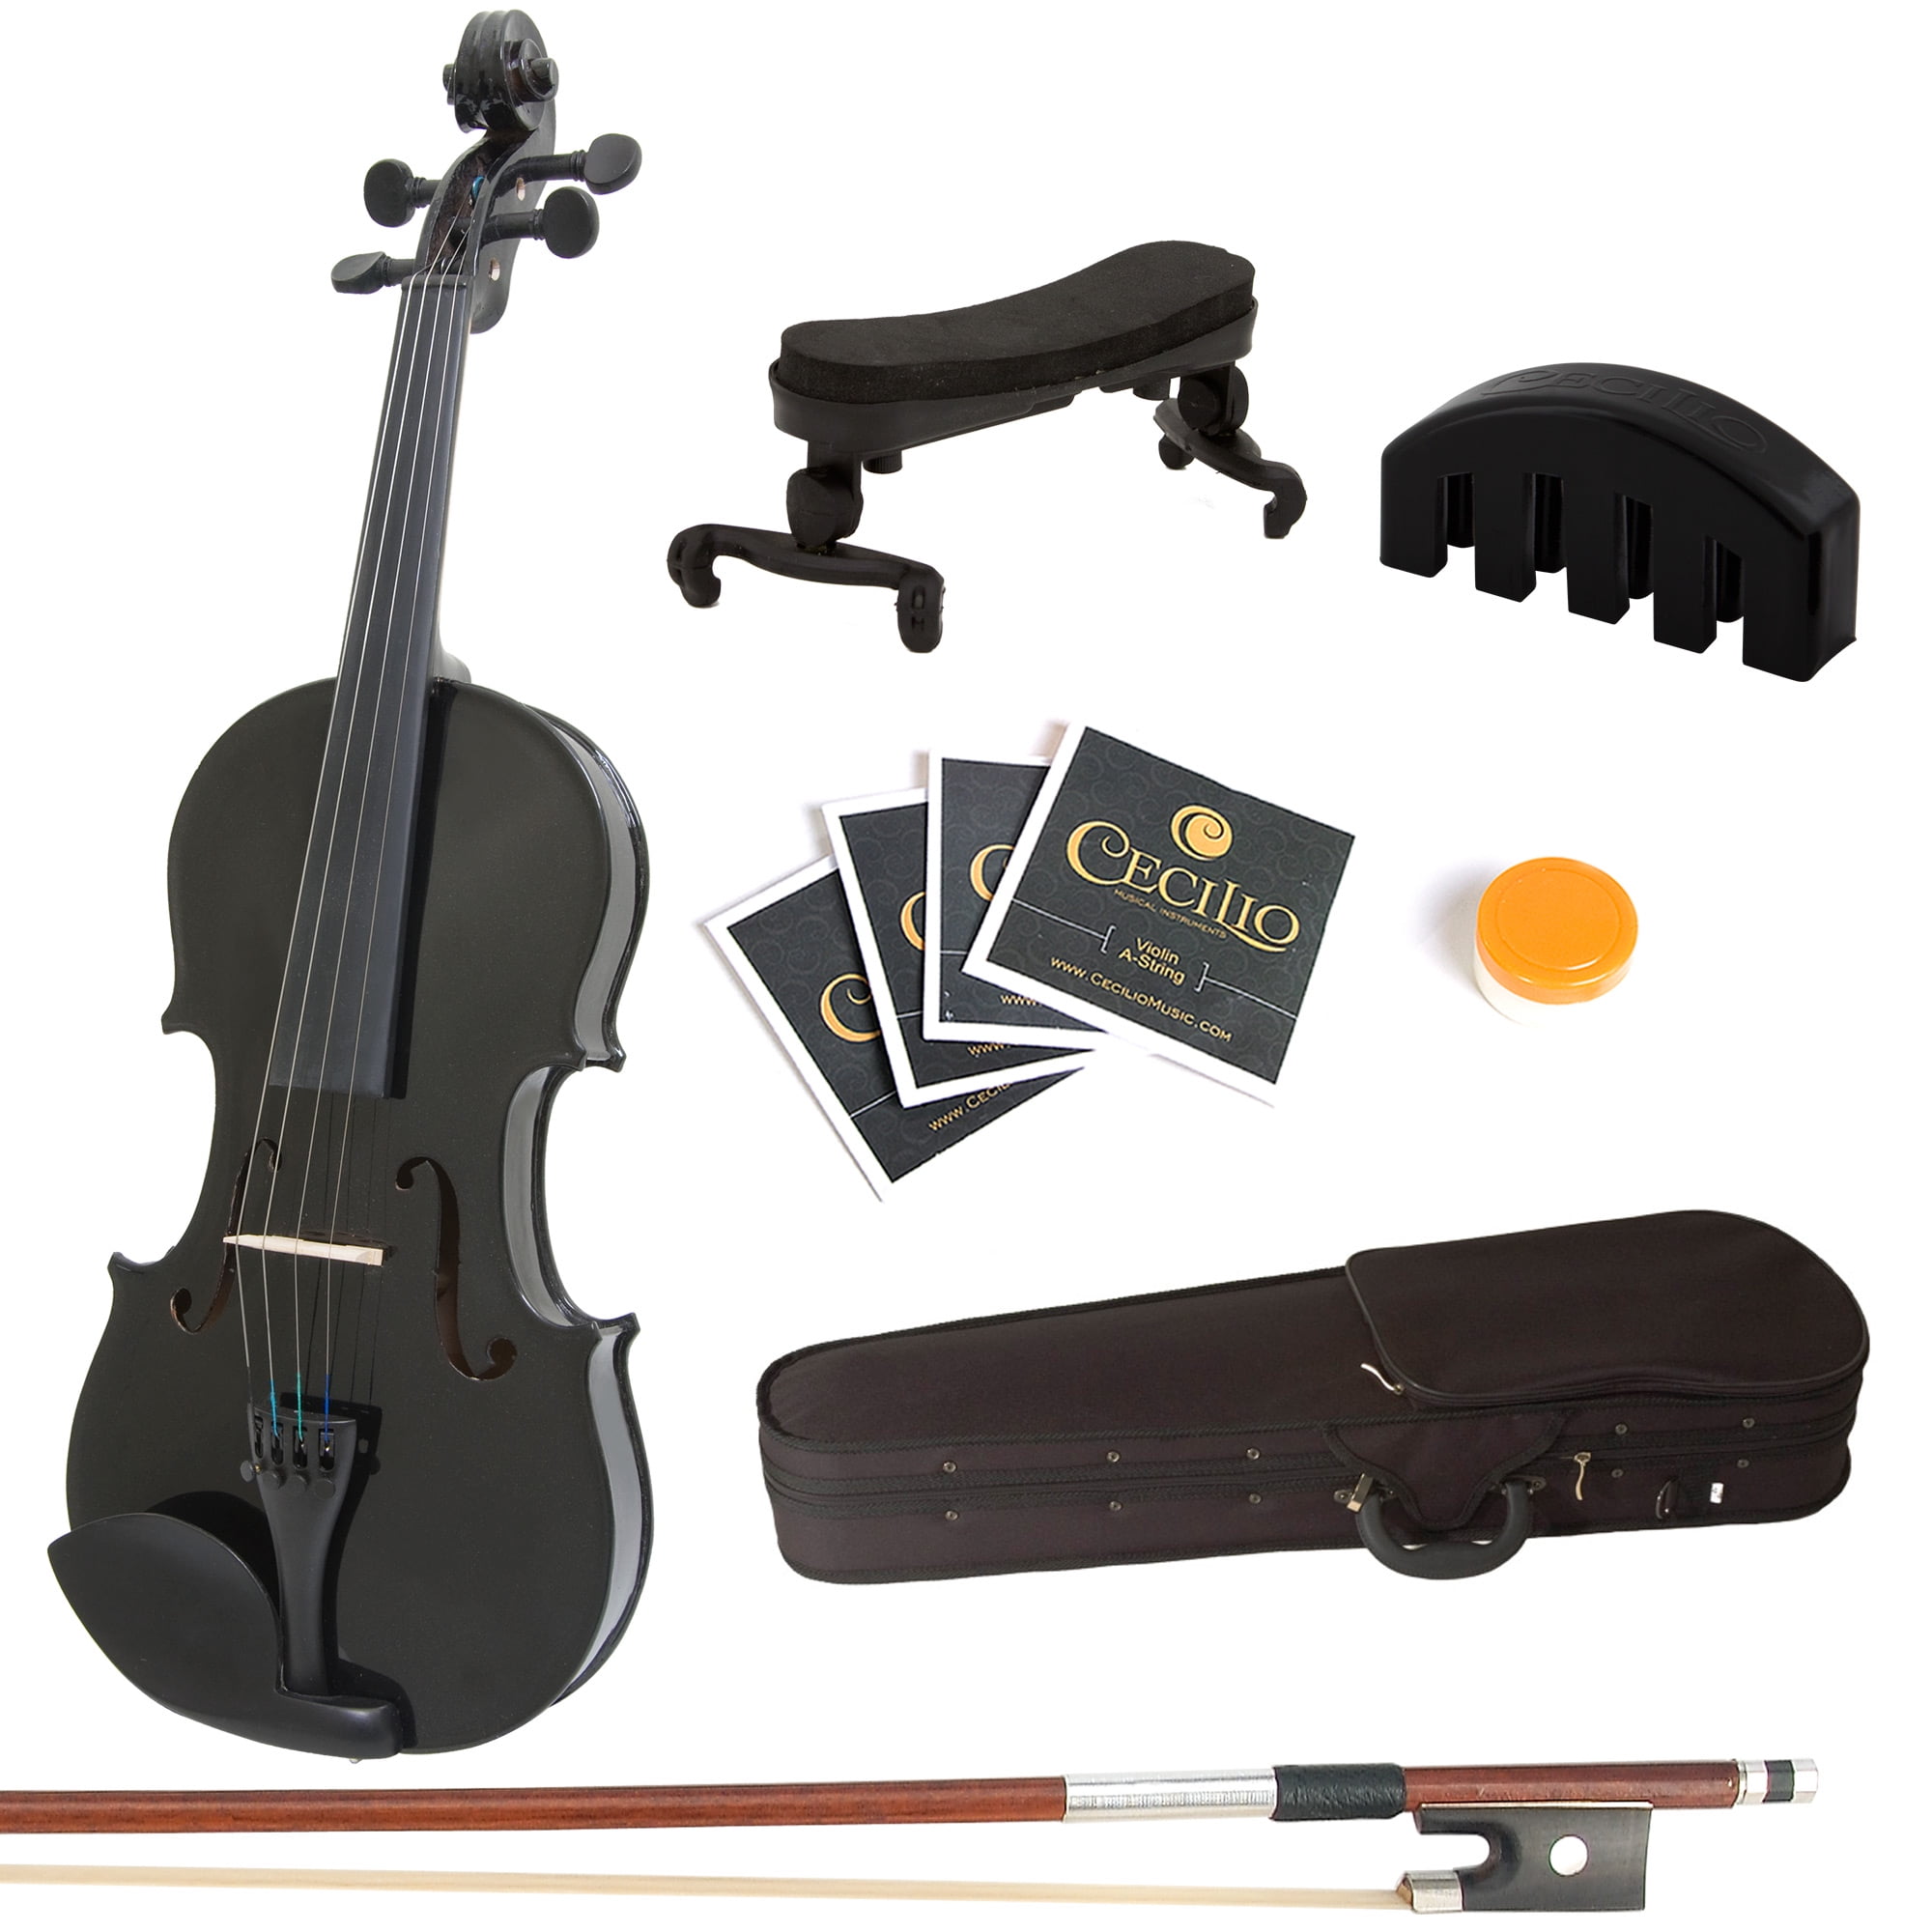 Rosin Mendini 16-Inch MA-Black Solid Wood Black Viola with Hard Case 2 Bridges and Extra Strings Bow